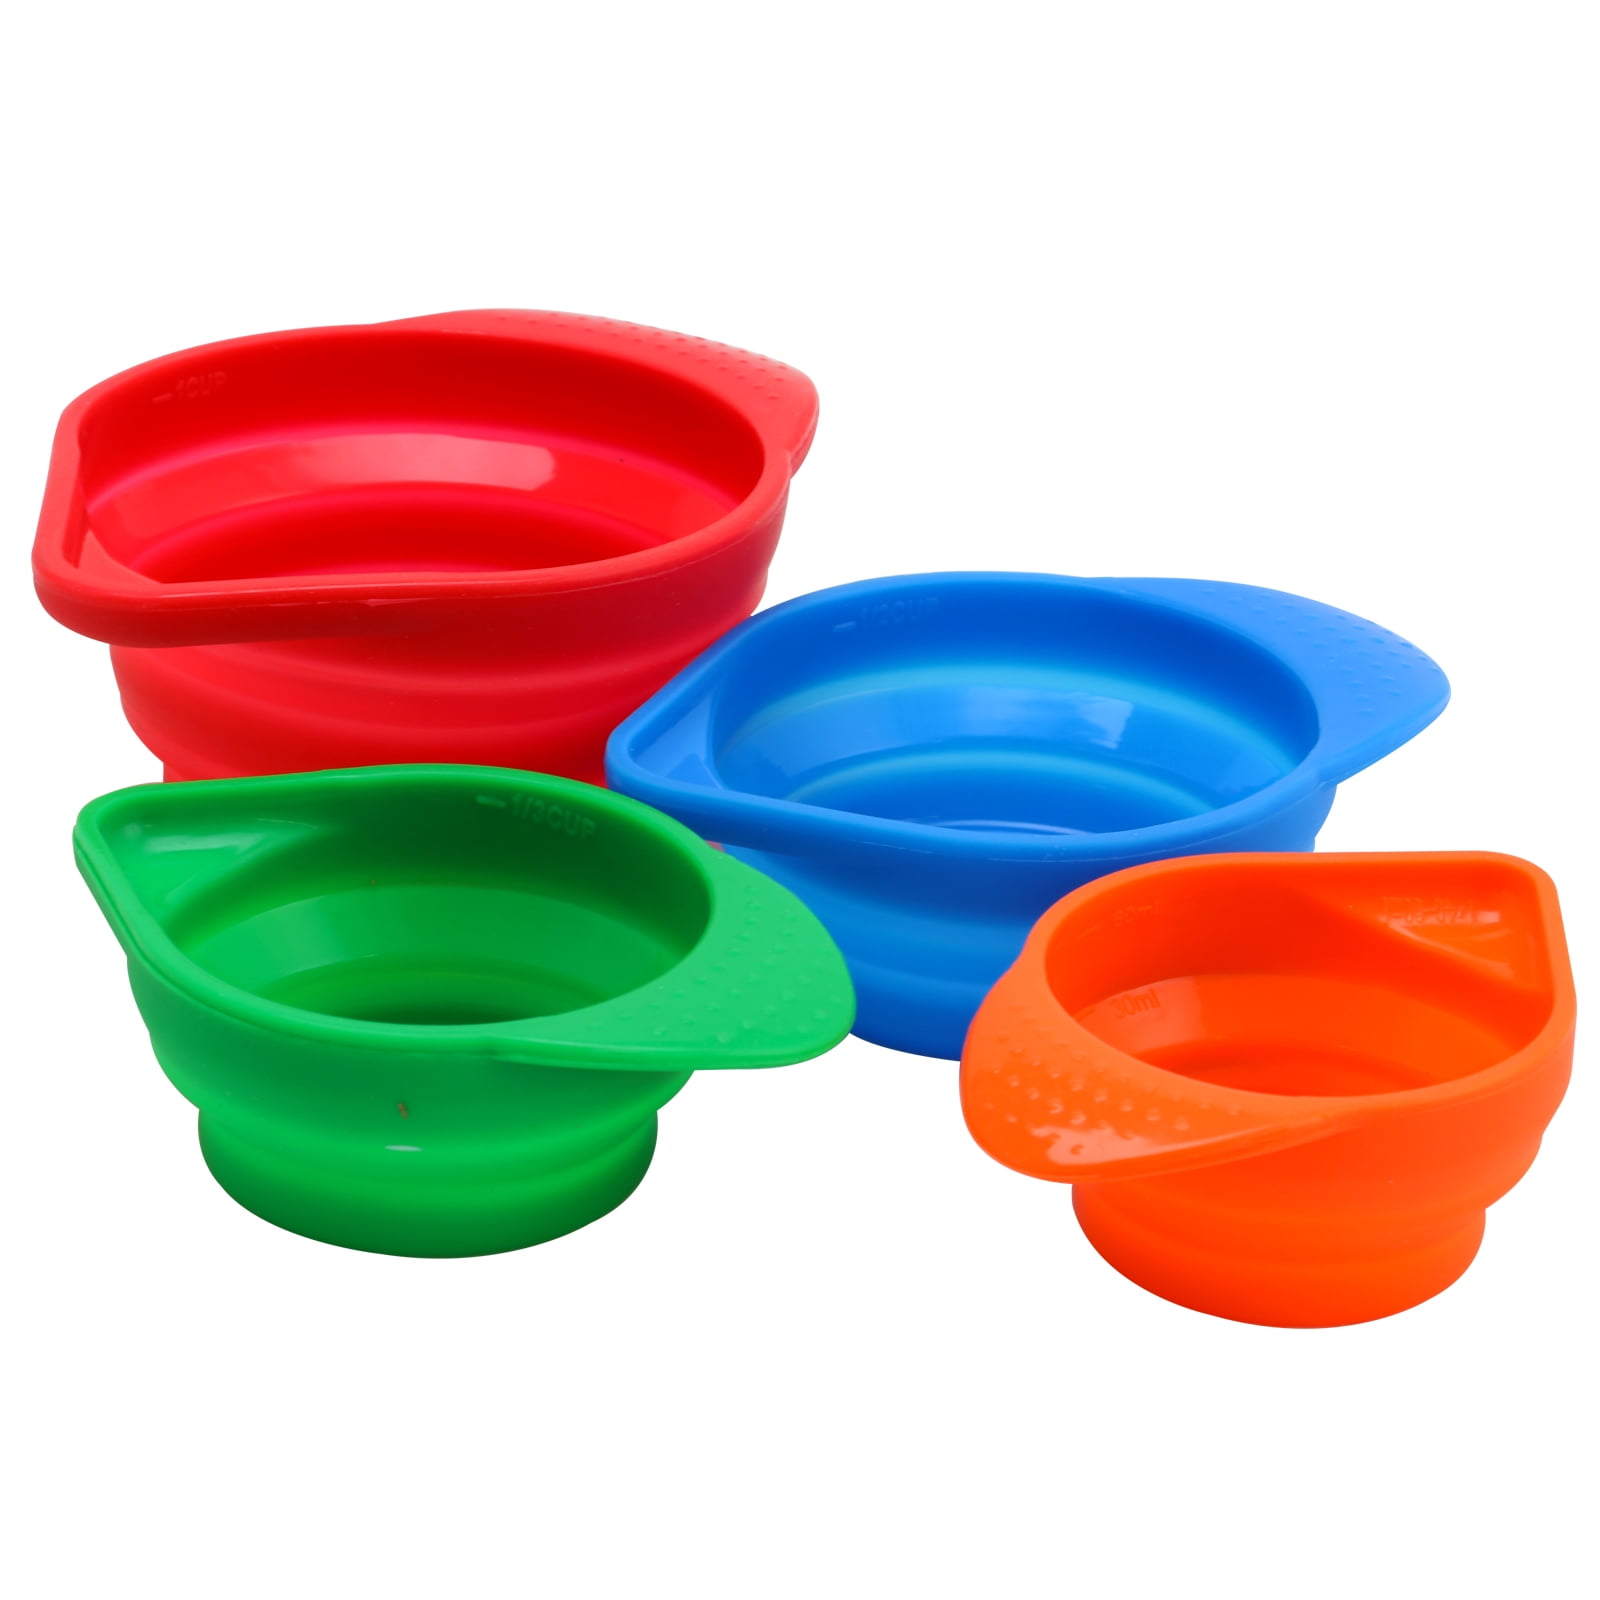 BAKED WITH LOVE 4 Silicone Collapsible Measuring Cups NEW